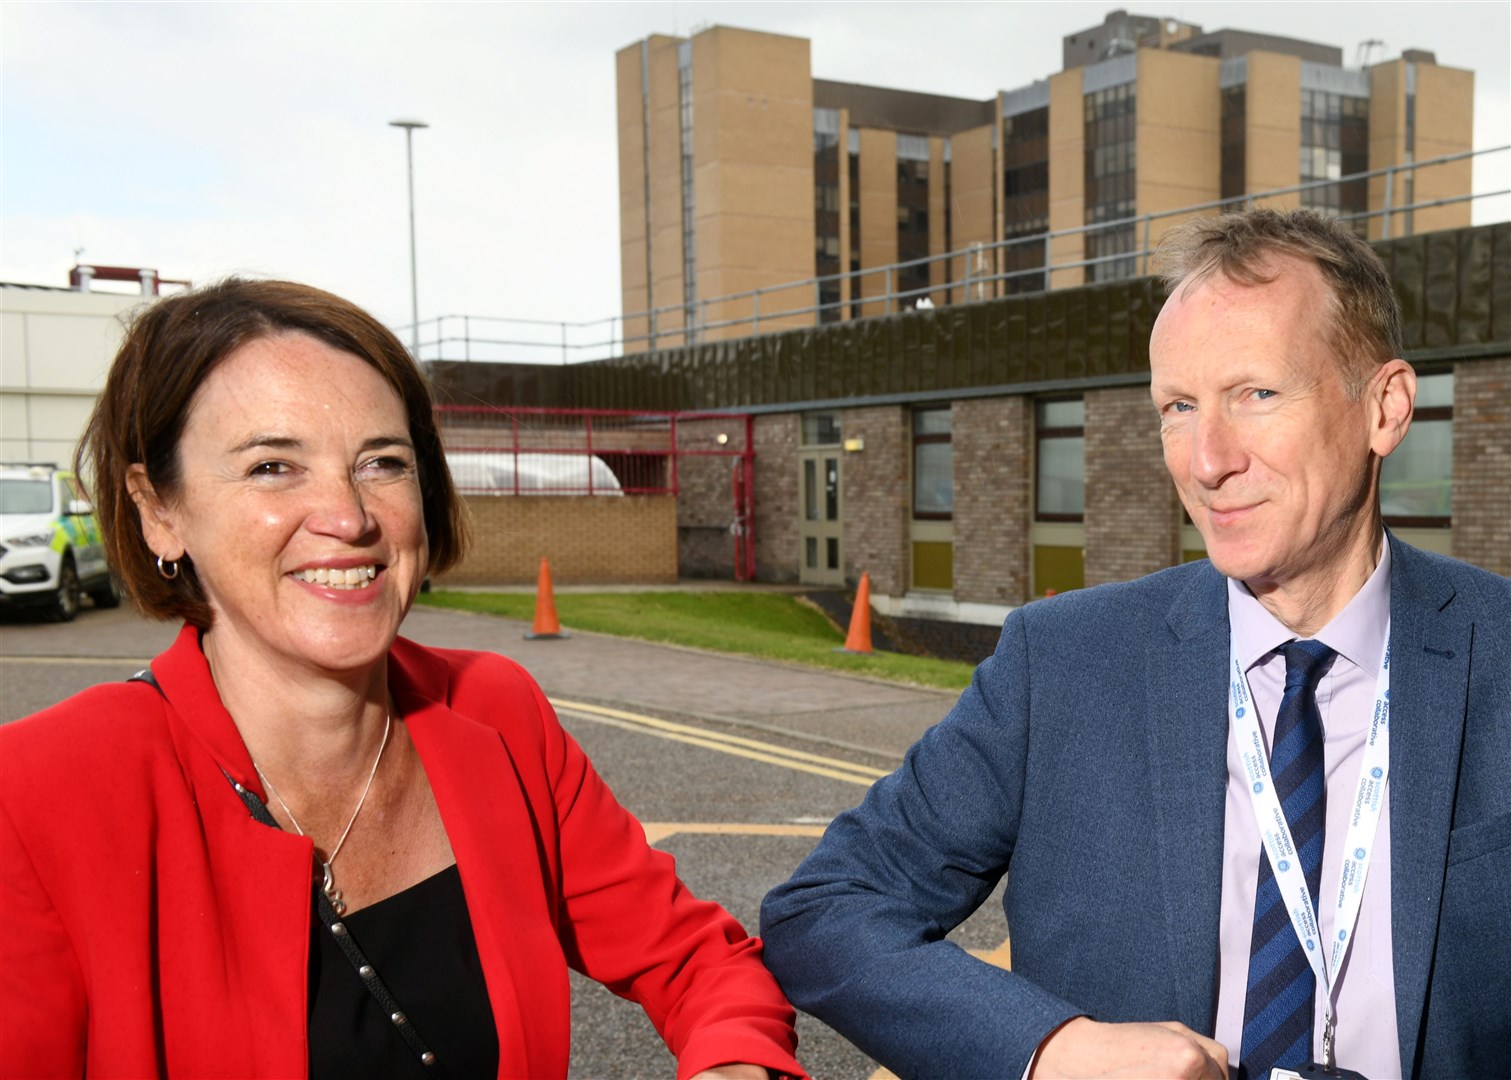 Caroline Lamb, chief executive of NHS Scotland, is welcomed to Raigmore Hospital by Dr Boyd Peters, NHS Highland medical director.